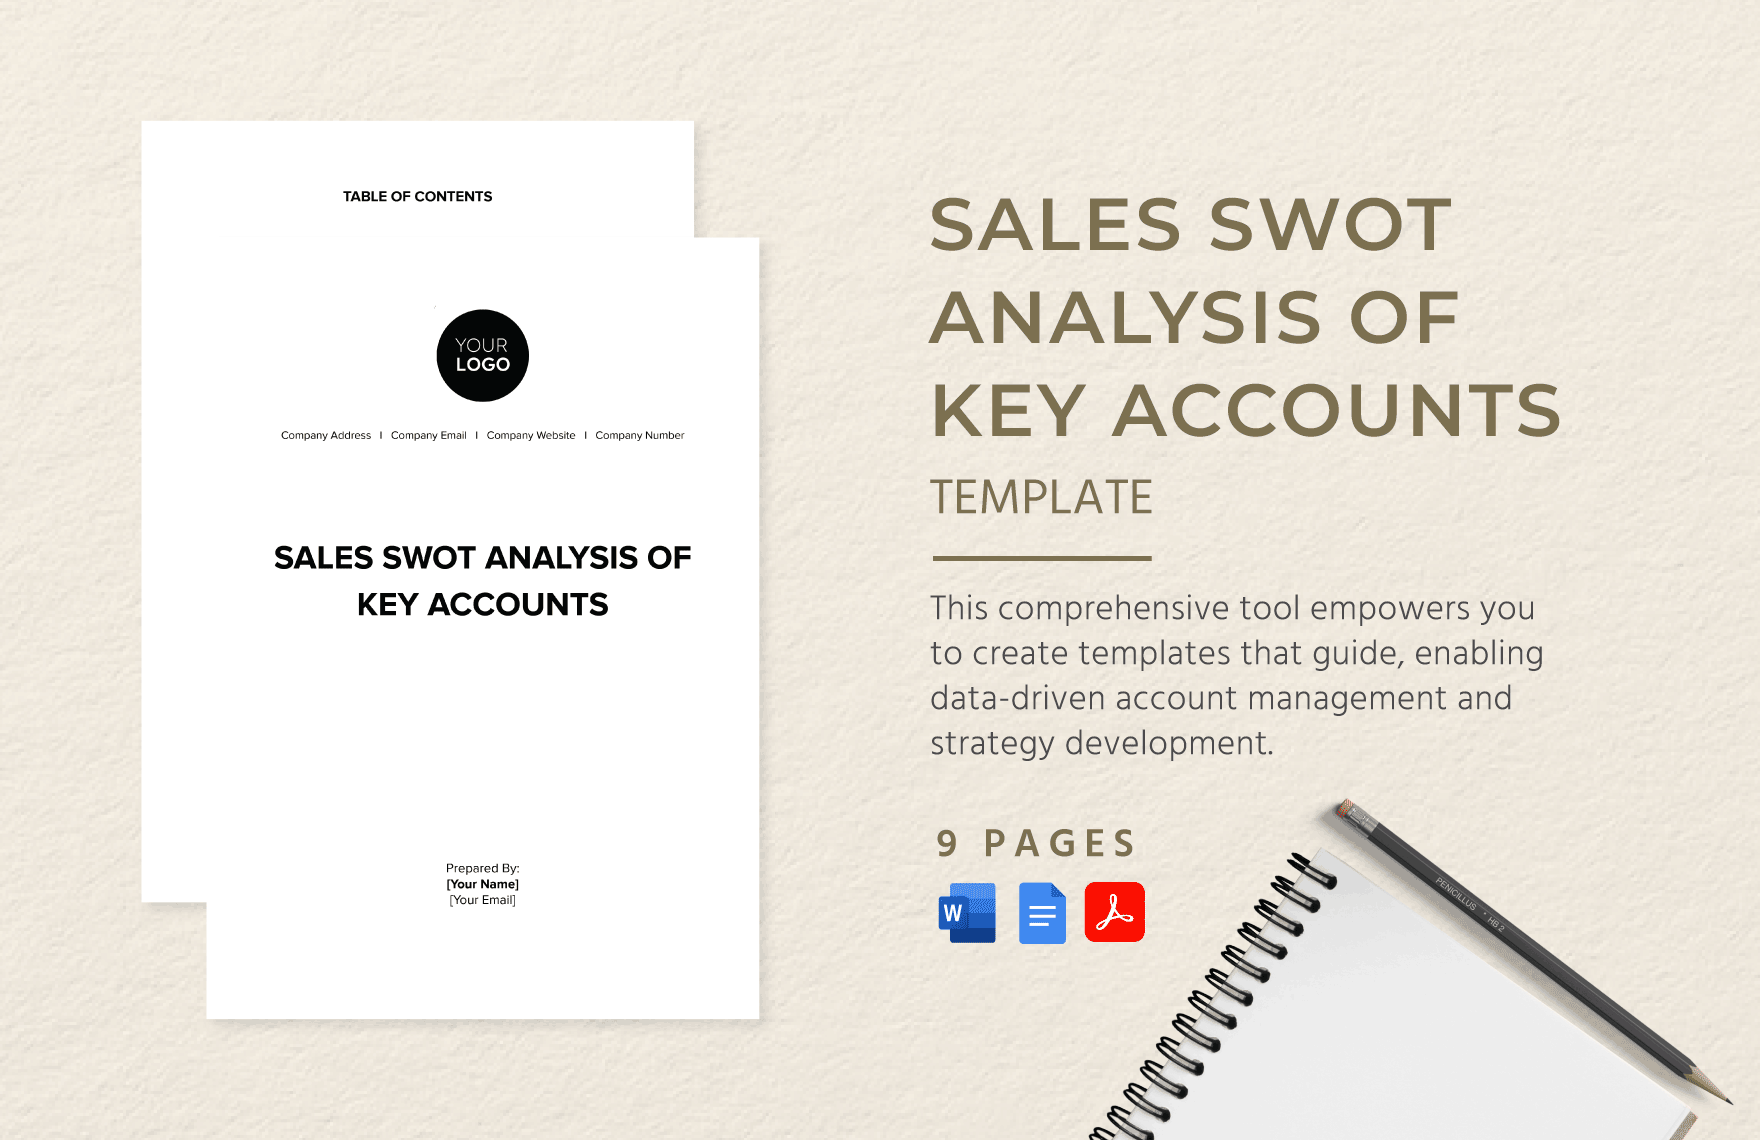 Sales SWOT Analysis of Key Accounts Template